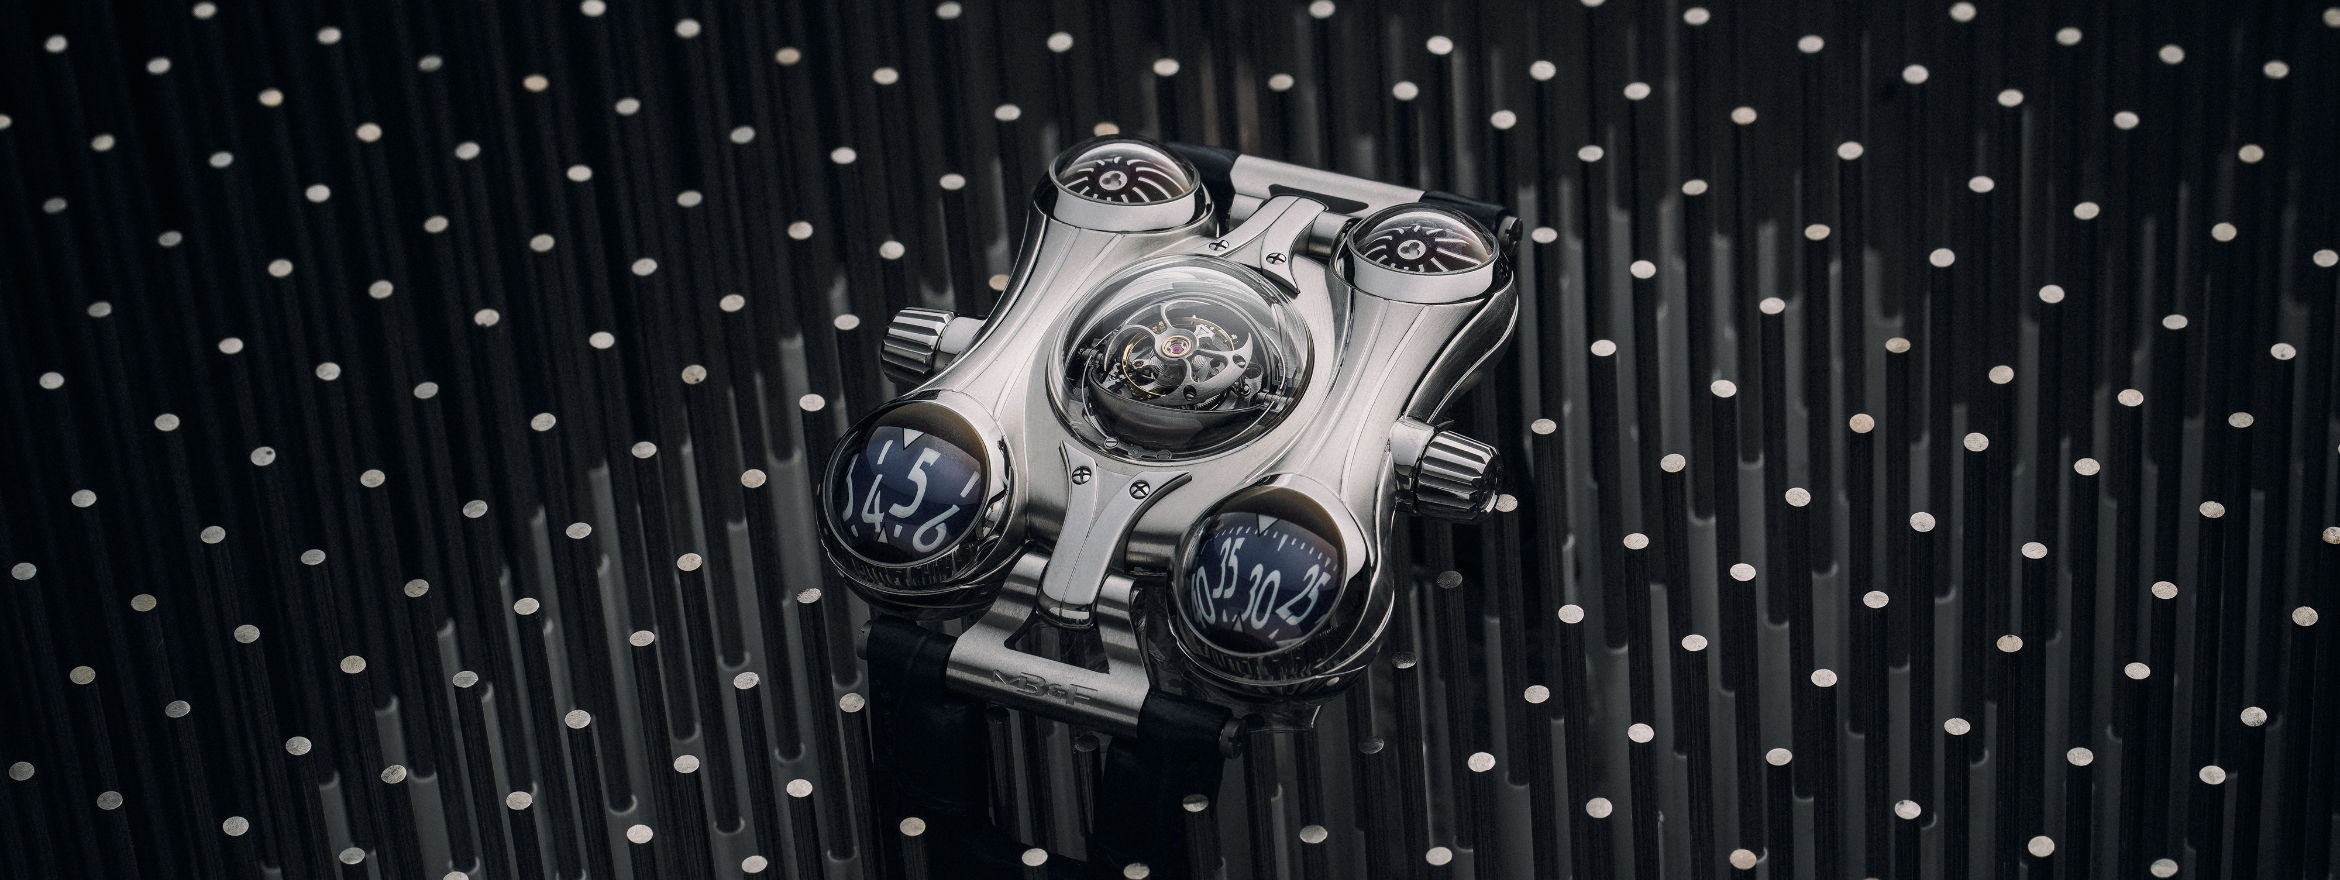 MB&F Horological Machines – A Thematic Evolution: Space and Origins